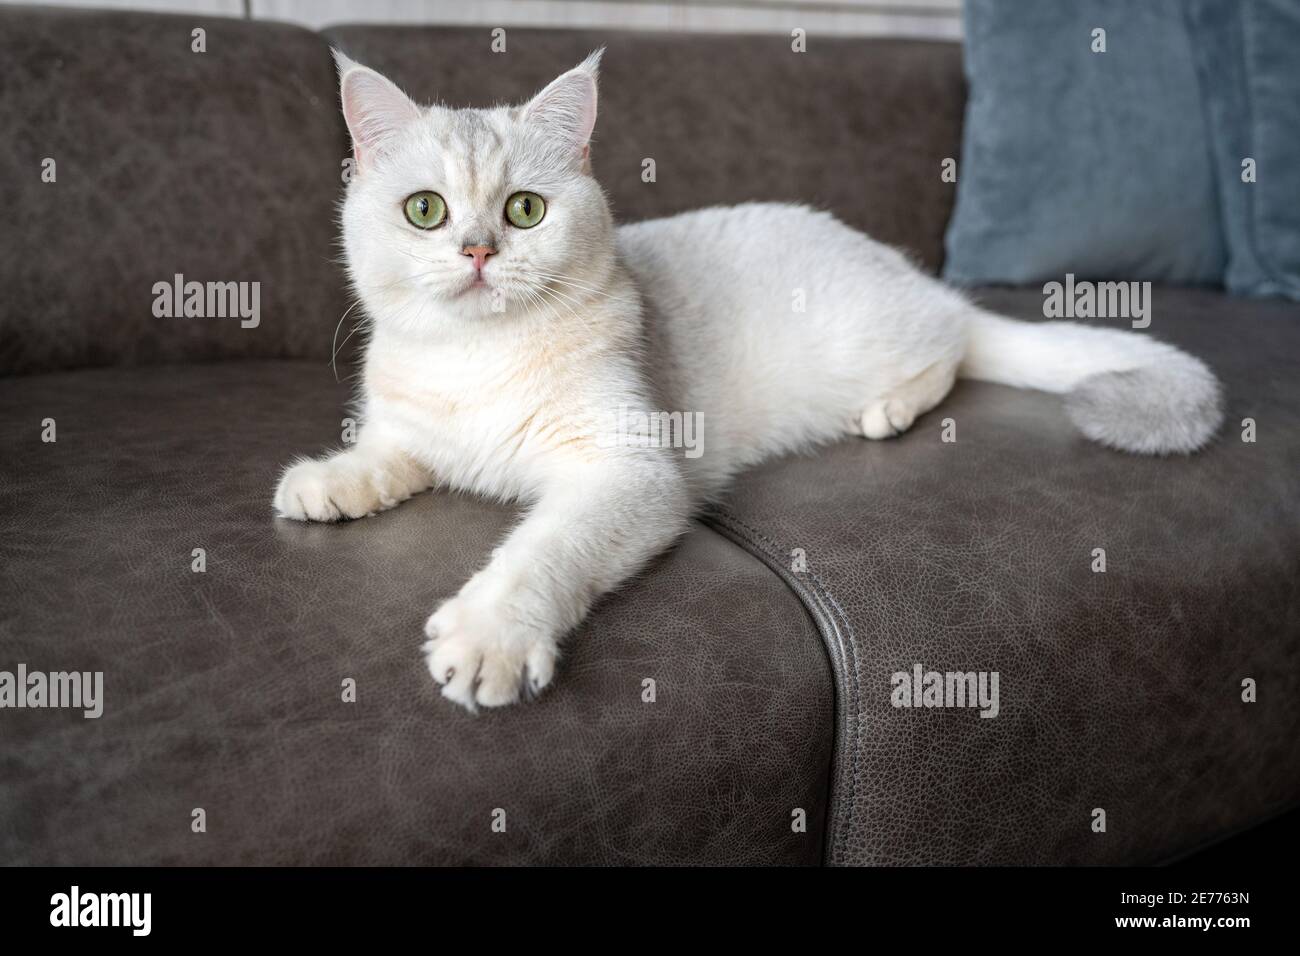 British shorthair cat silver shaded color and green eyes, Pure and beautiful breed are resting comfortably on dark color sofa in house. Stock Photo